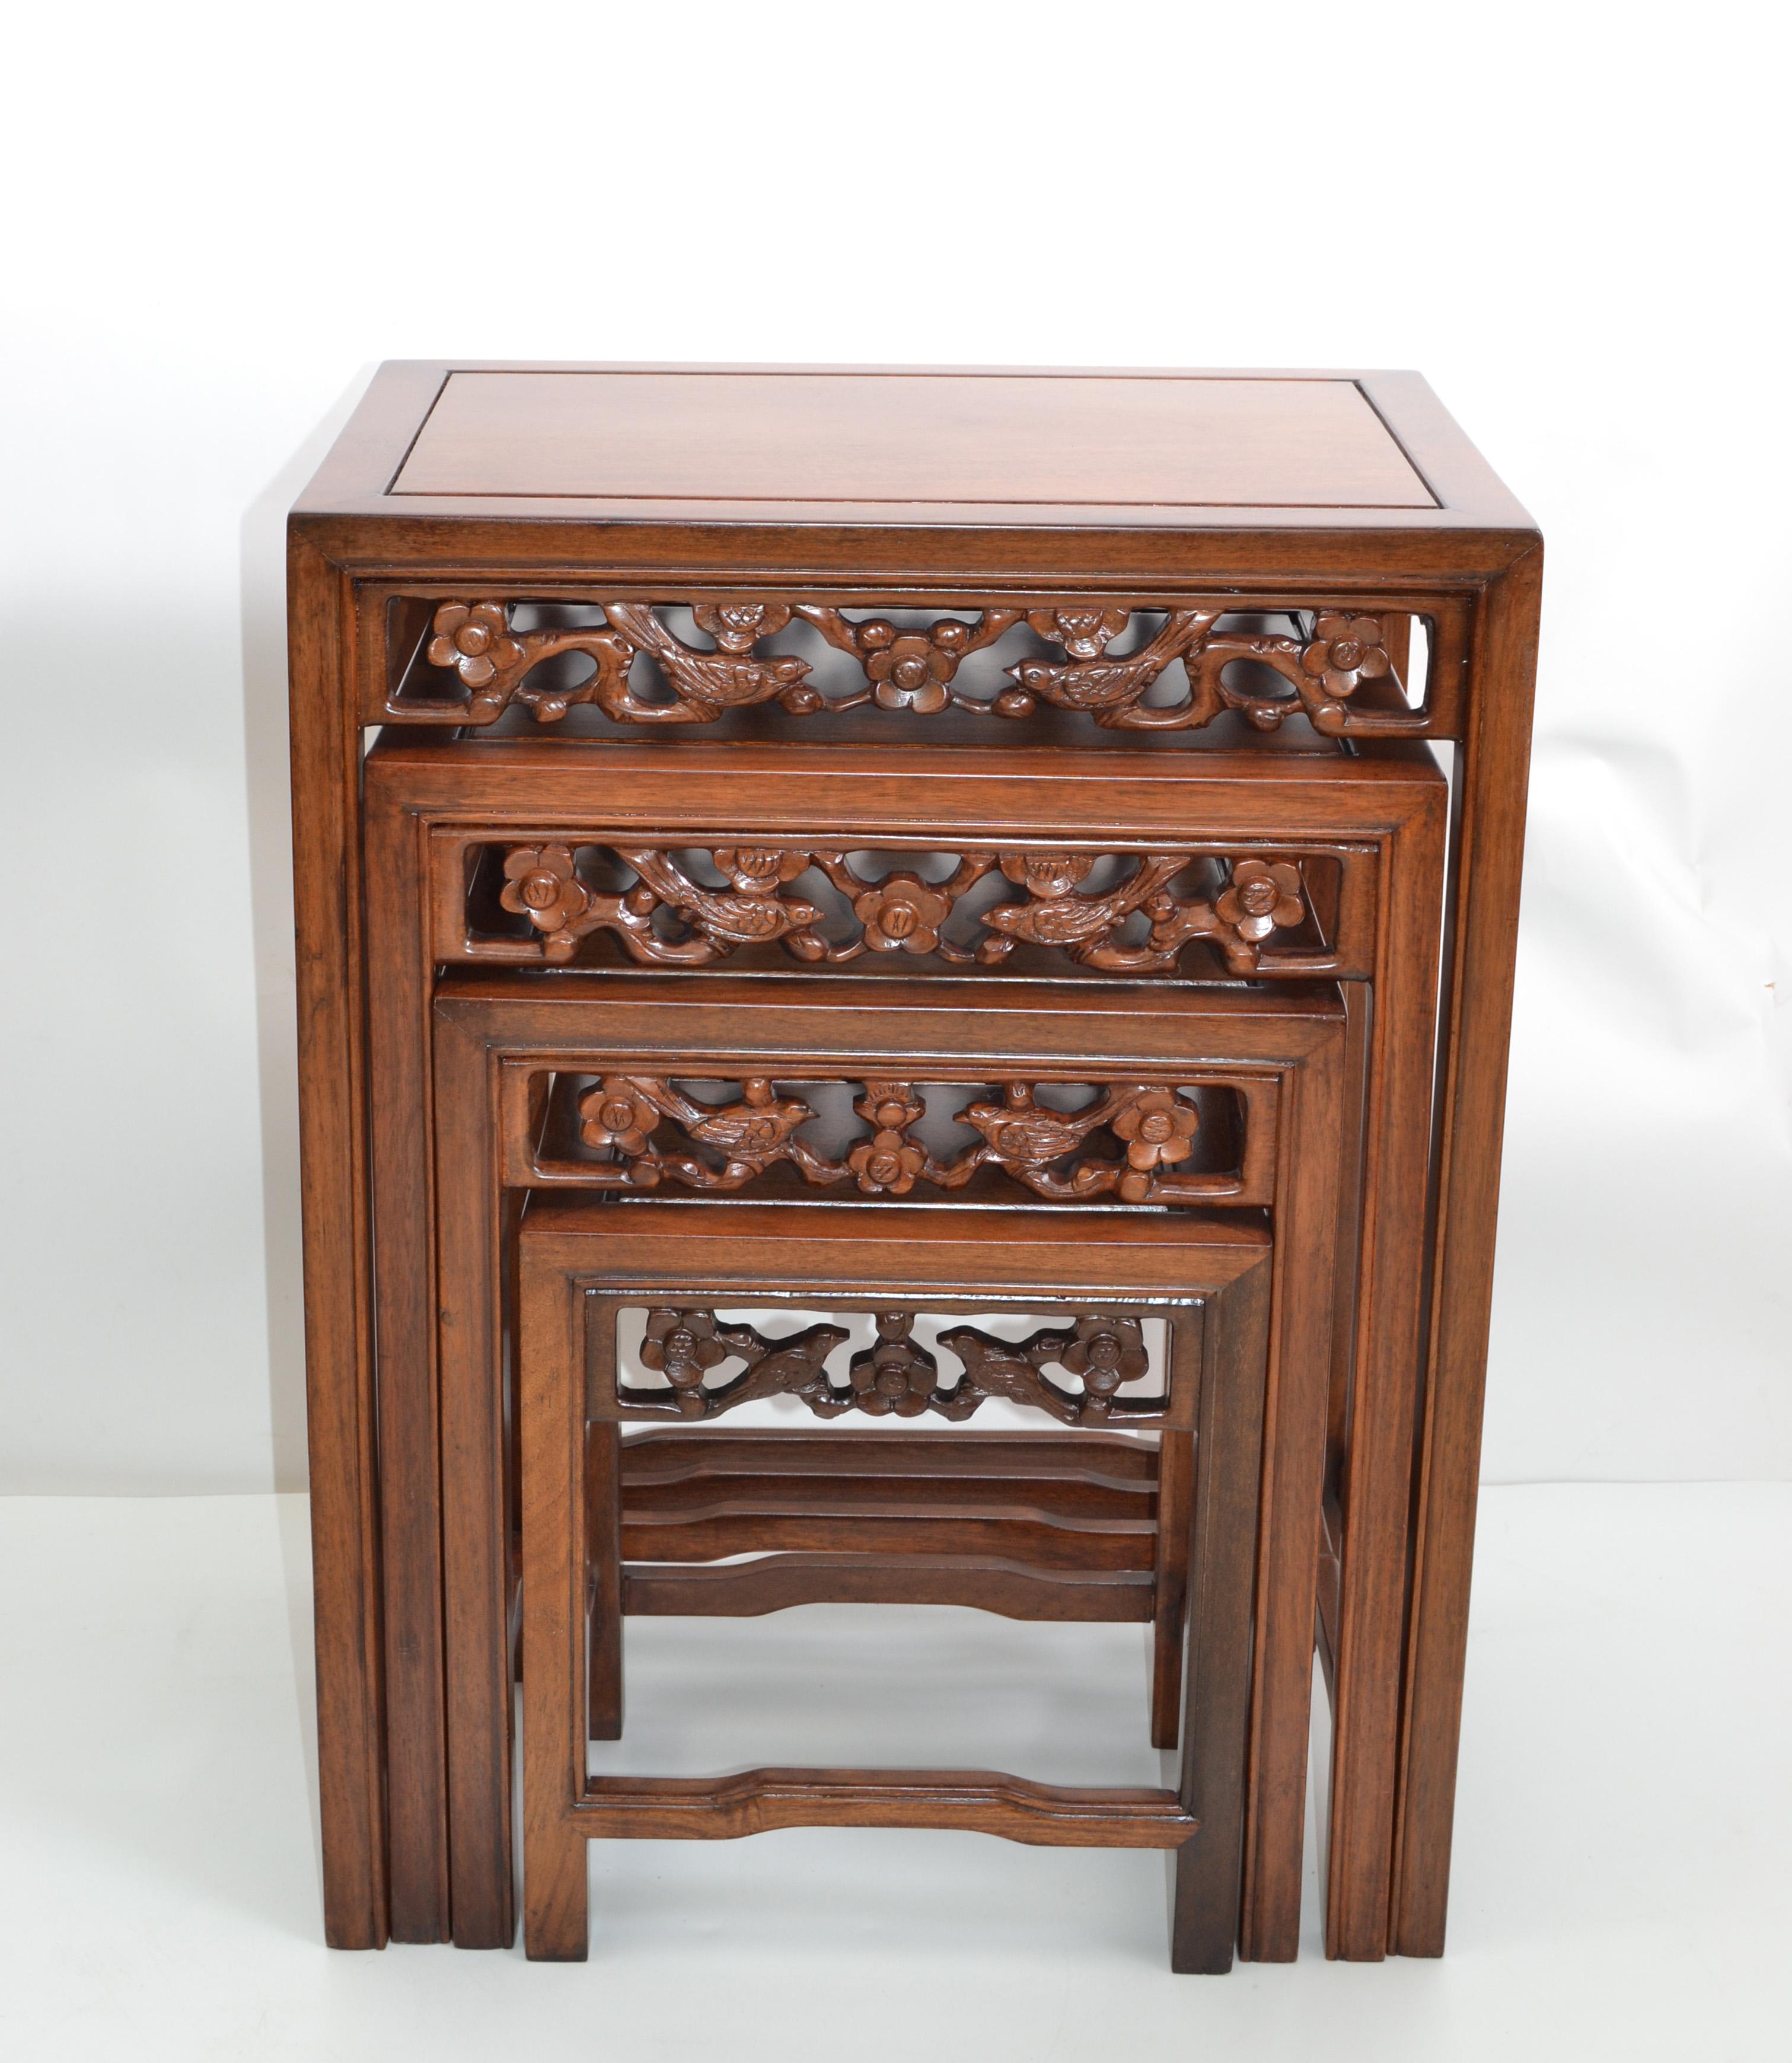 Chinoiserie Hand Carved Asian Wood Nesting Tables or Stacking Tables, Set of 4 For Sale 3